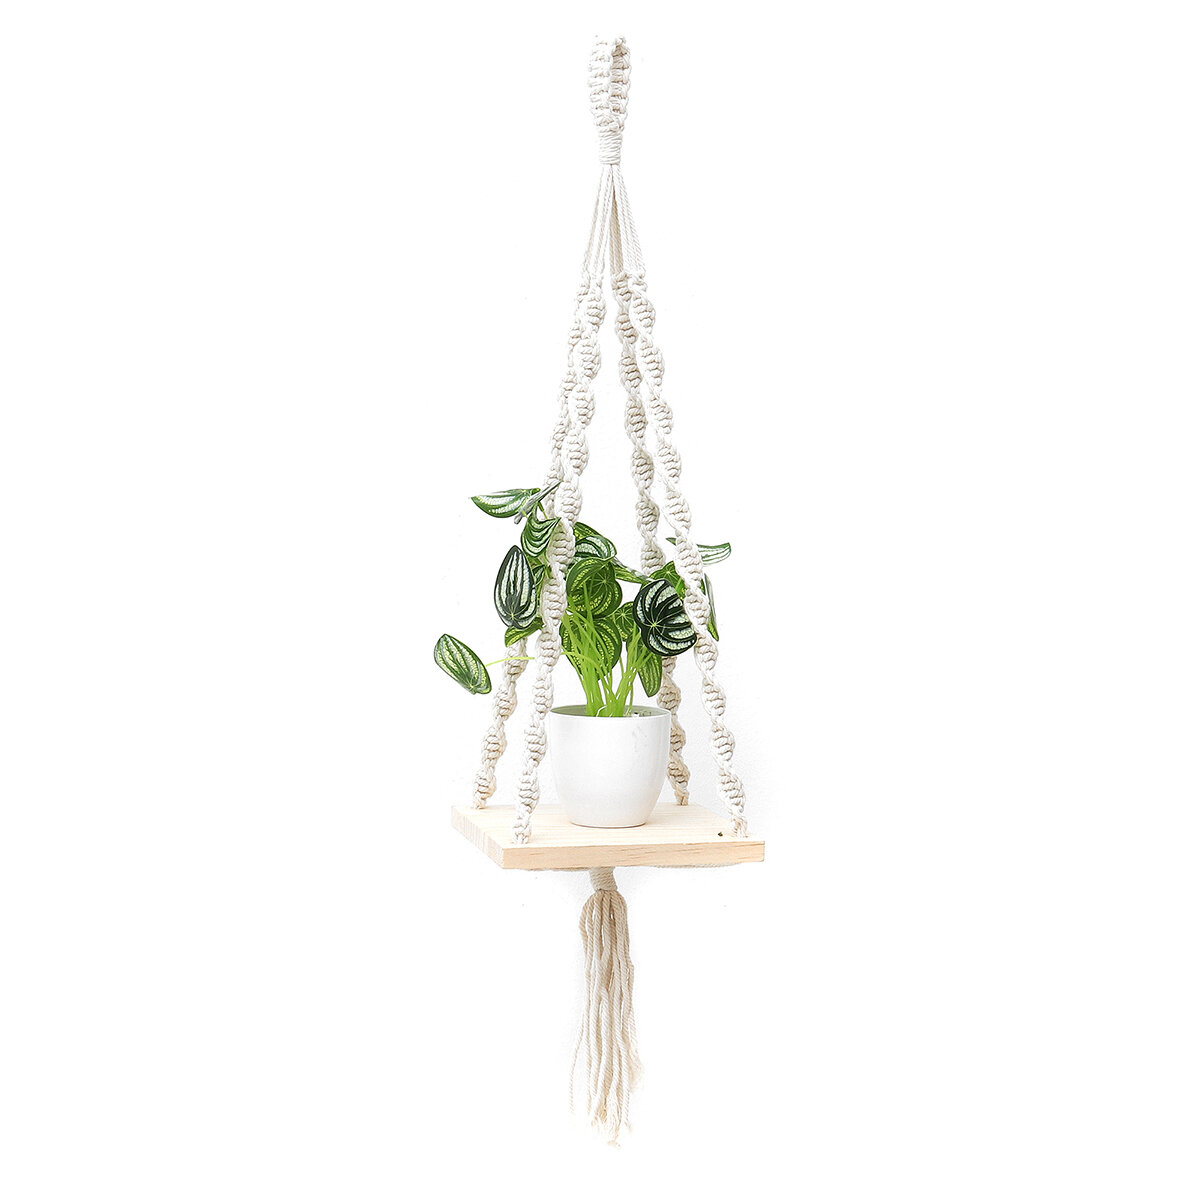 2 Tiers Wooden Wall Hanging Shelf Bohemian Handmade Macrame Wall Rope Rustic Shelves Floating Plant Rack Home Office Decorations COD